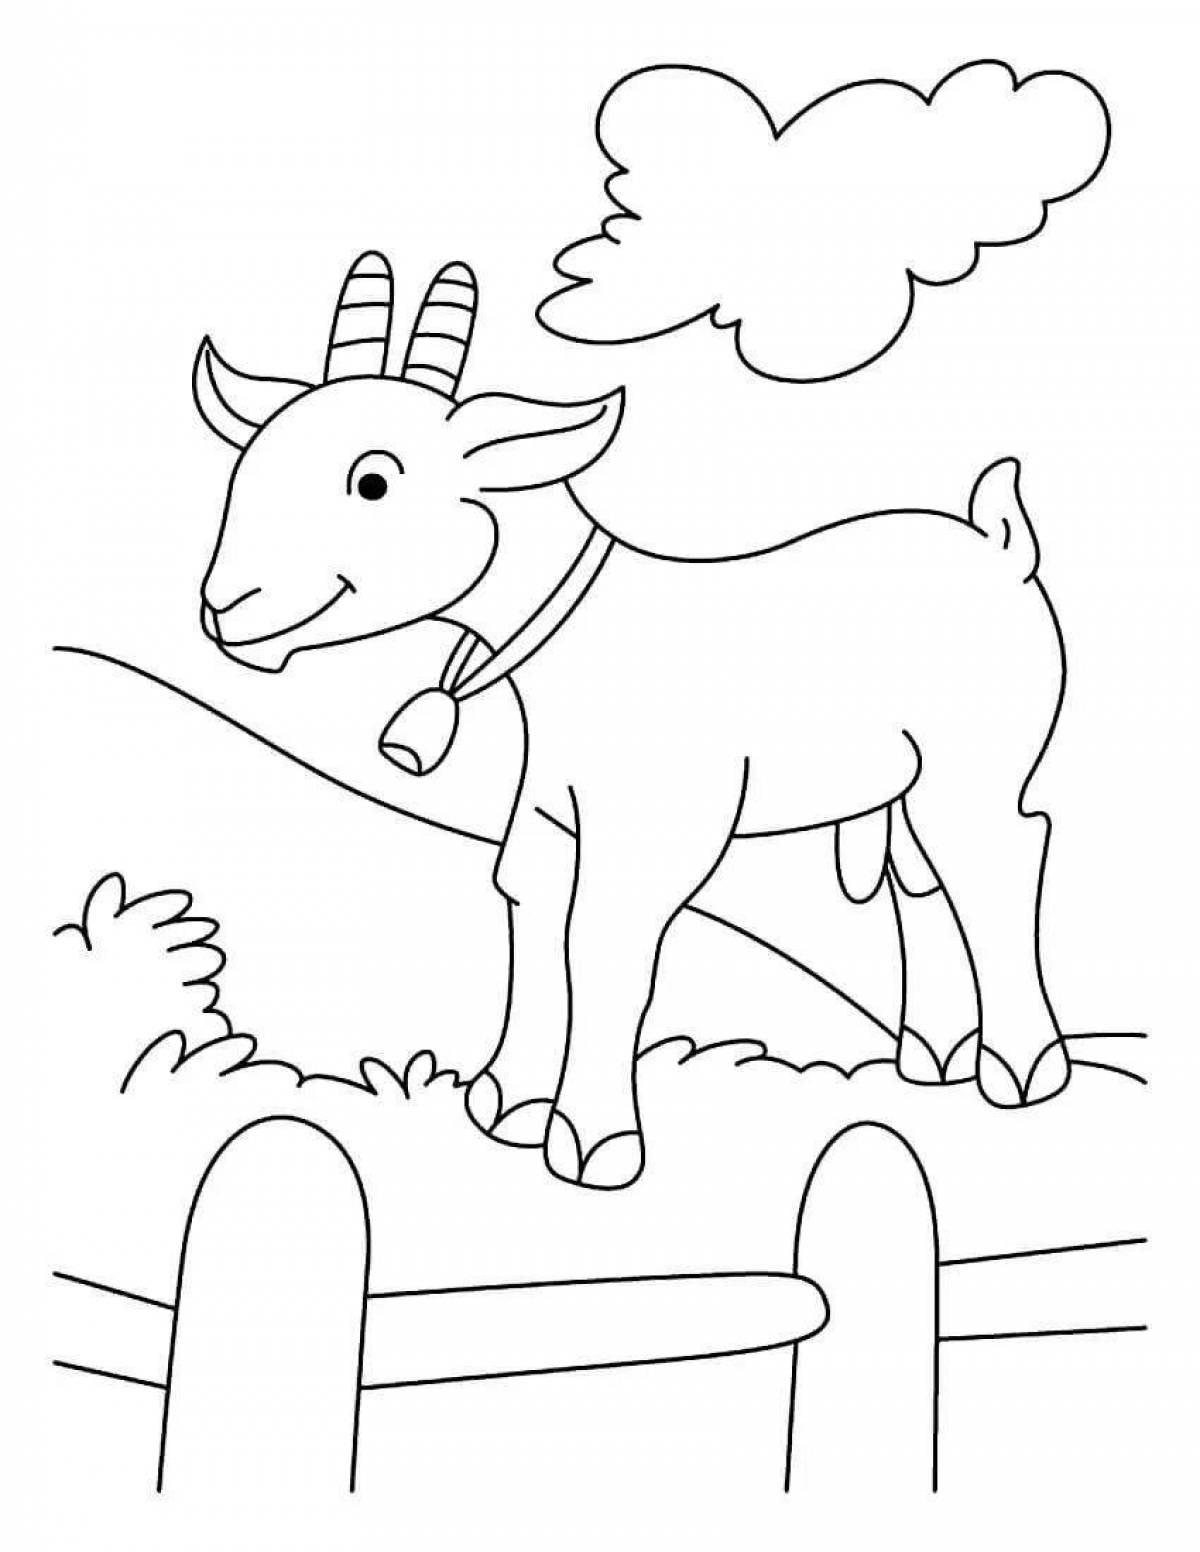 Coloring book enthusiastic goat for kids